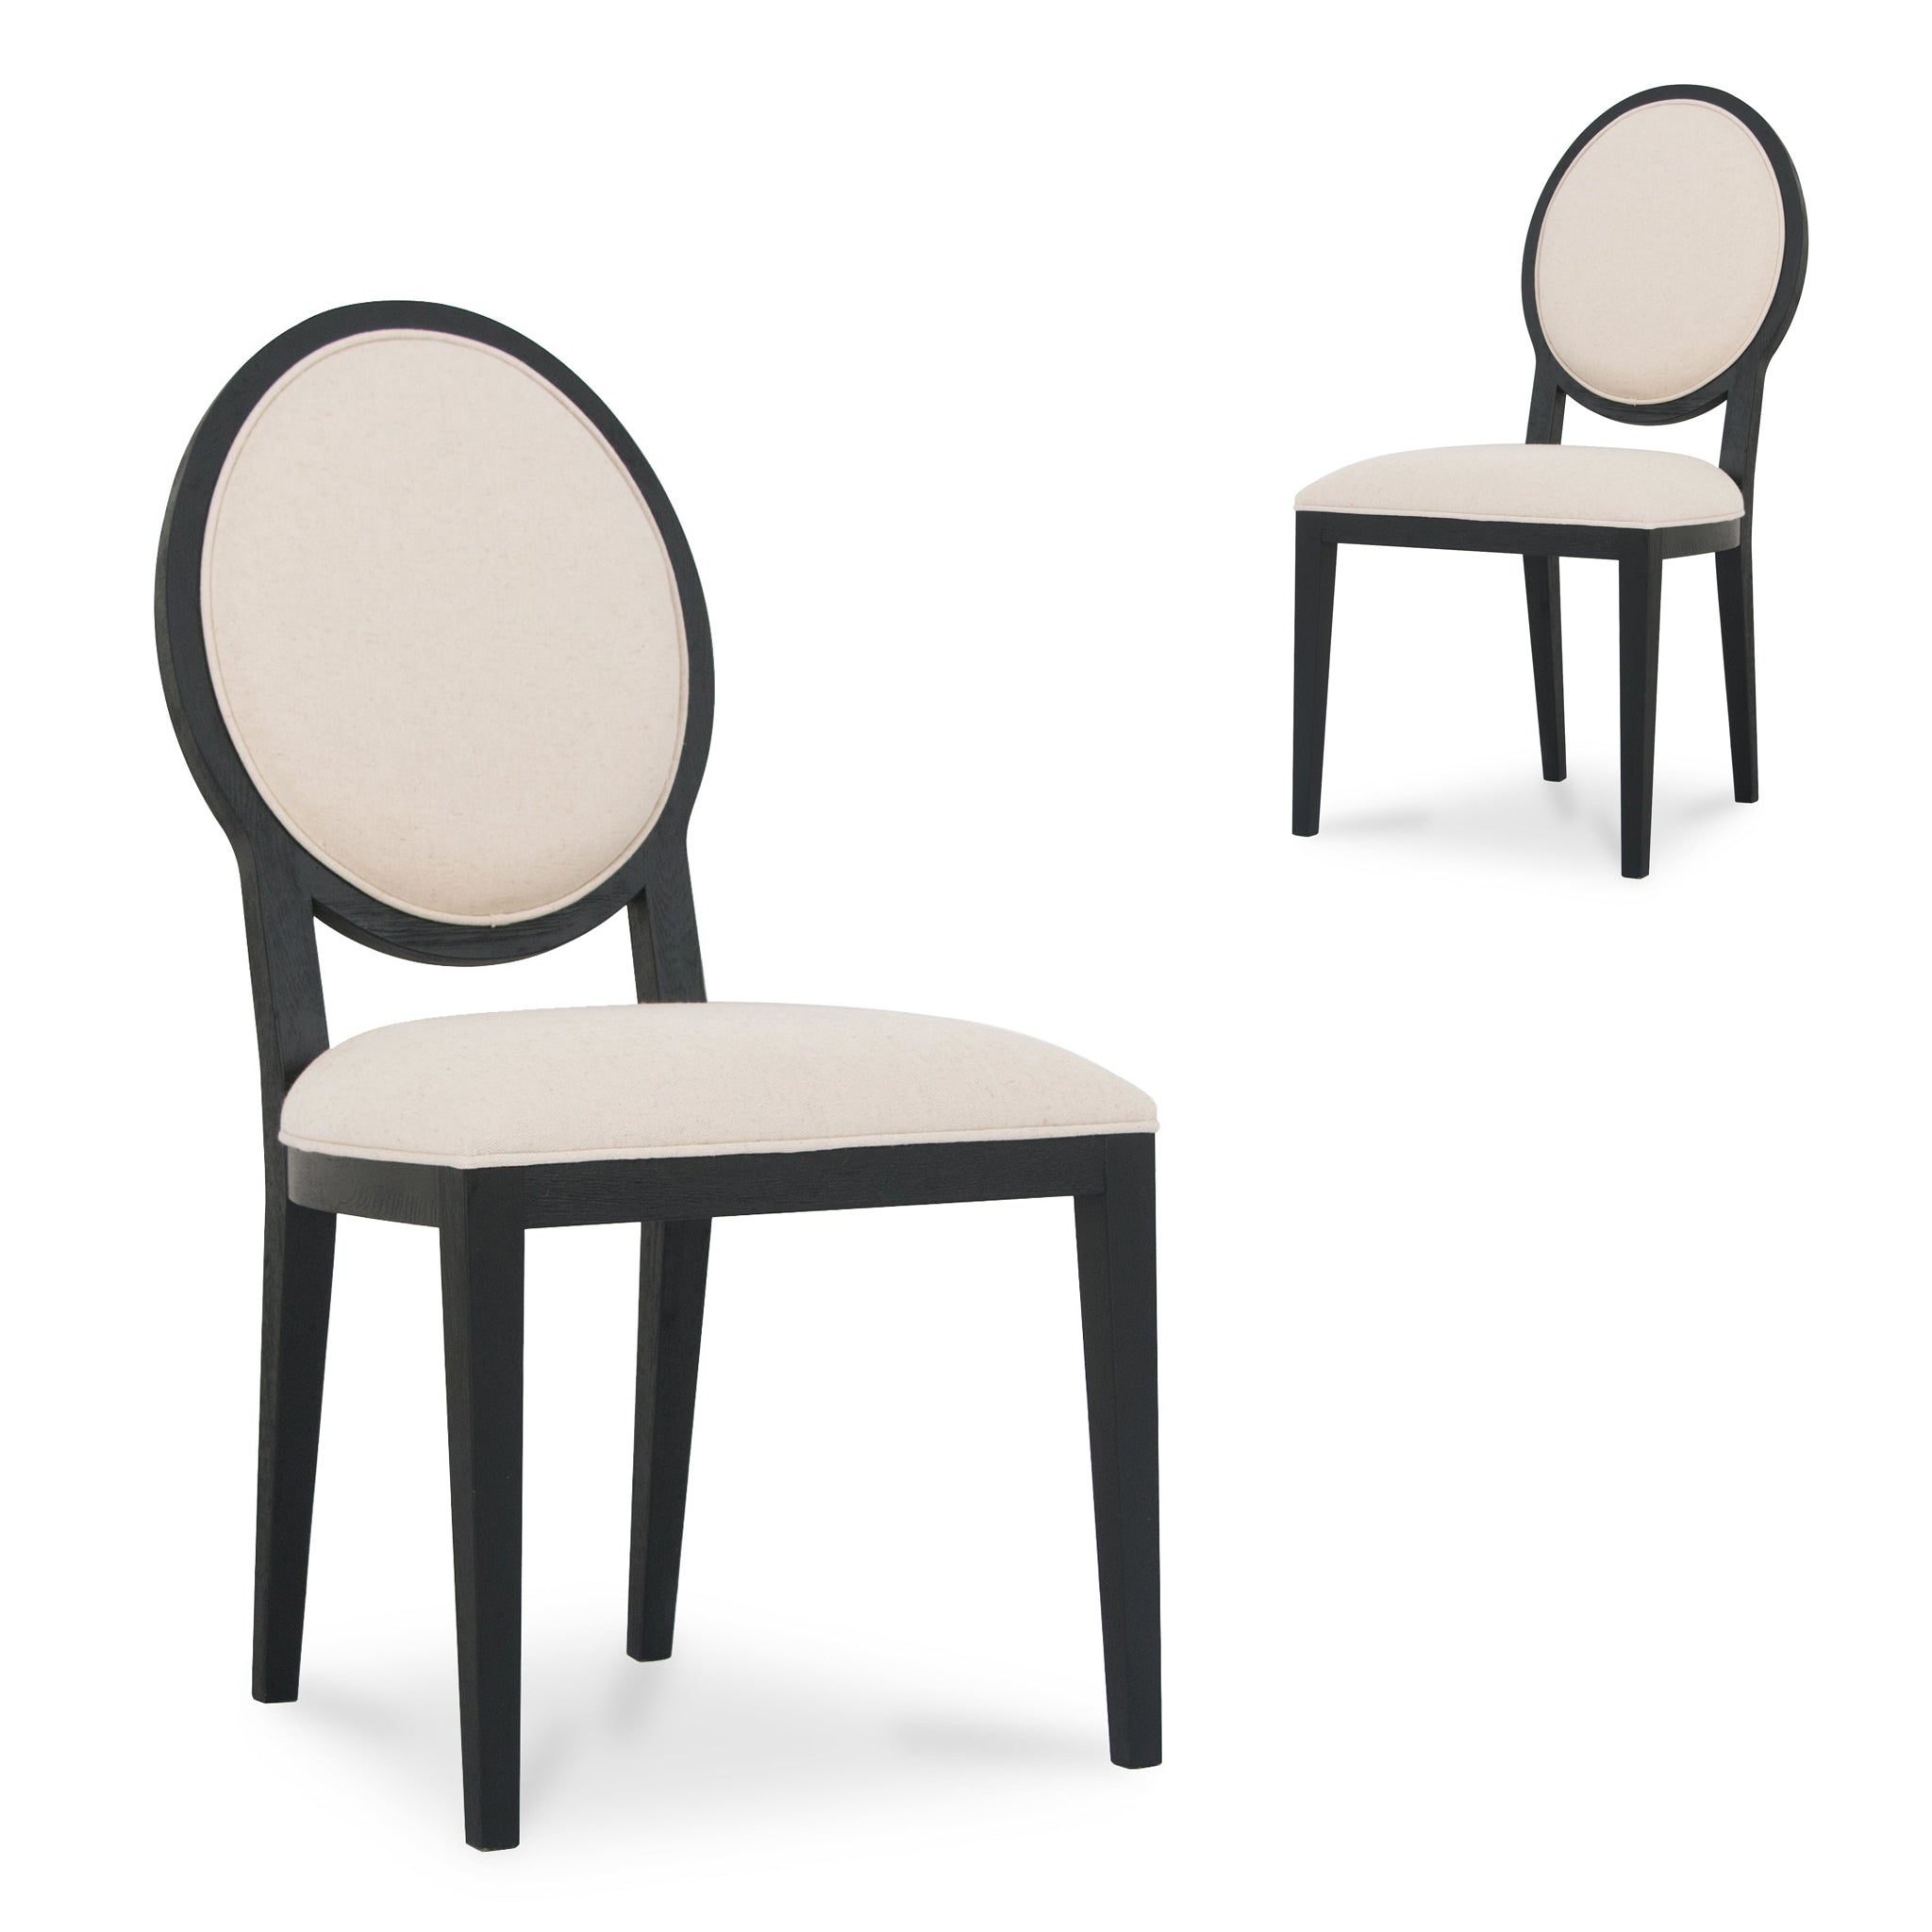 Set of 2 Ayla Fabric Dining Chair - Beige and Black - Dining Chairs